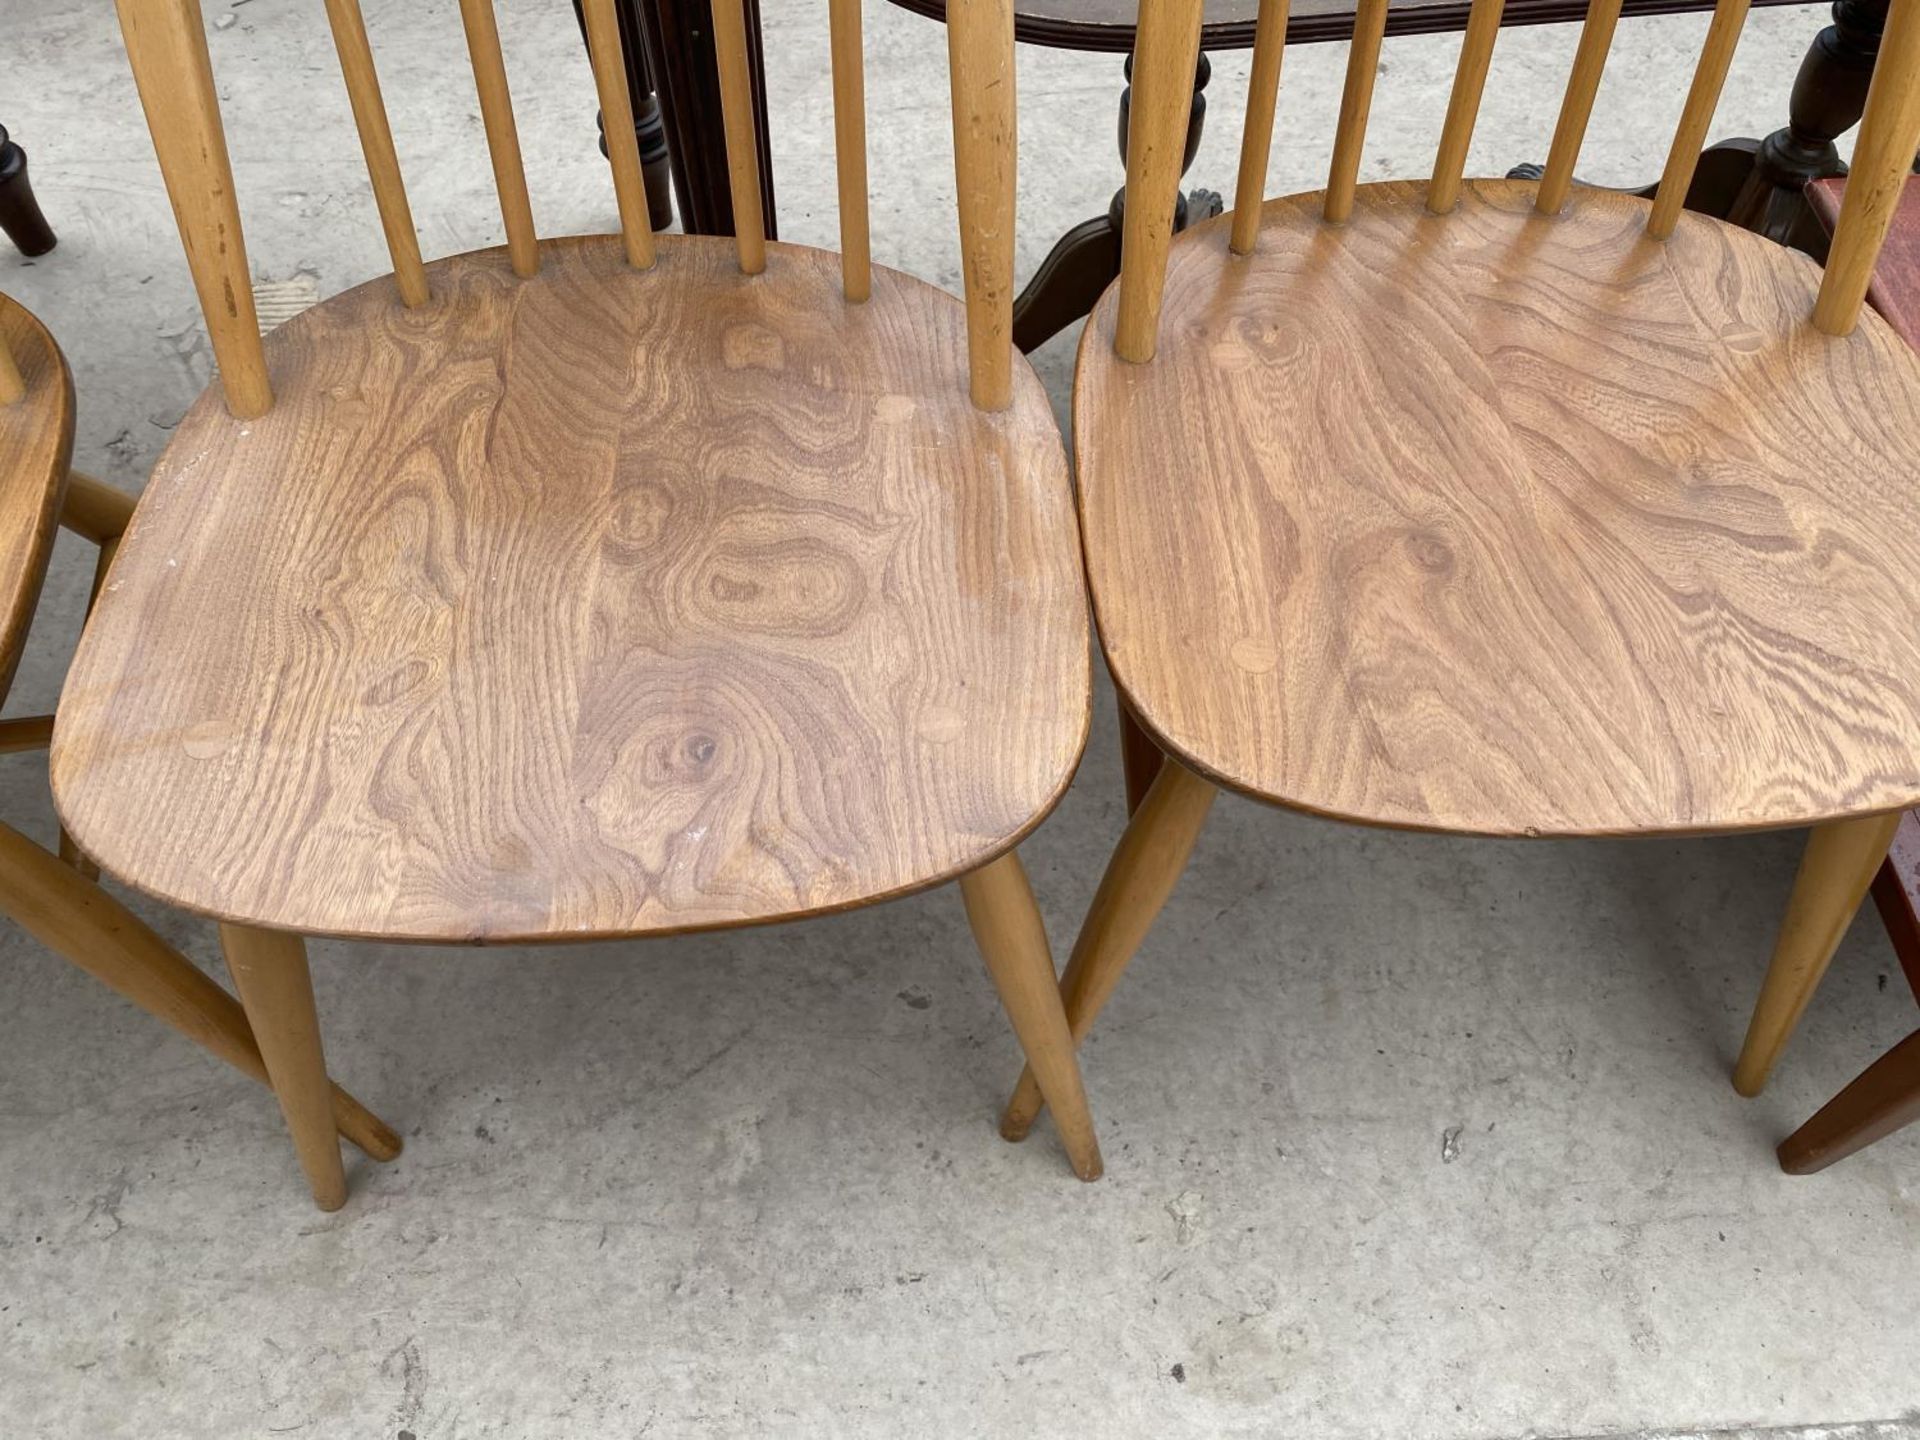 FOUR ERCOL ELM AND BEECH DINING CHAIRS - Image 5 of 8